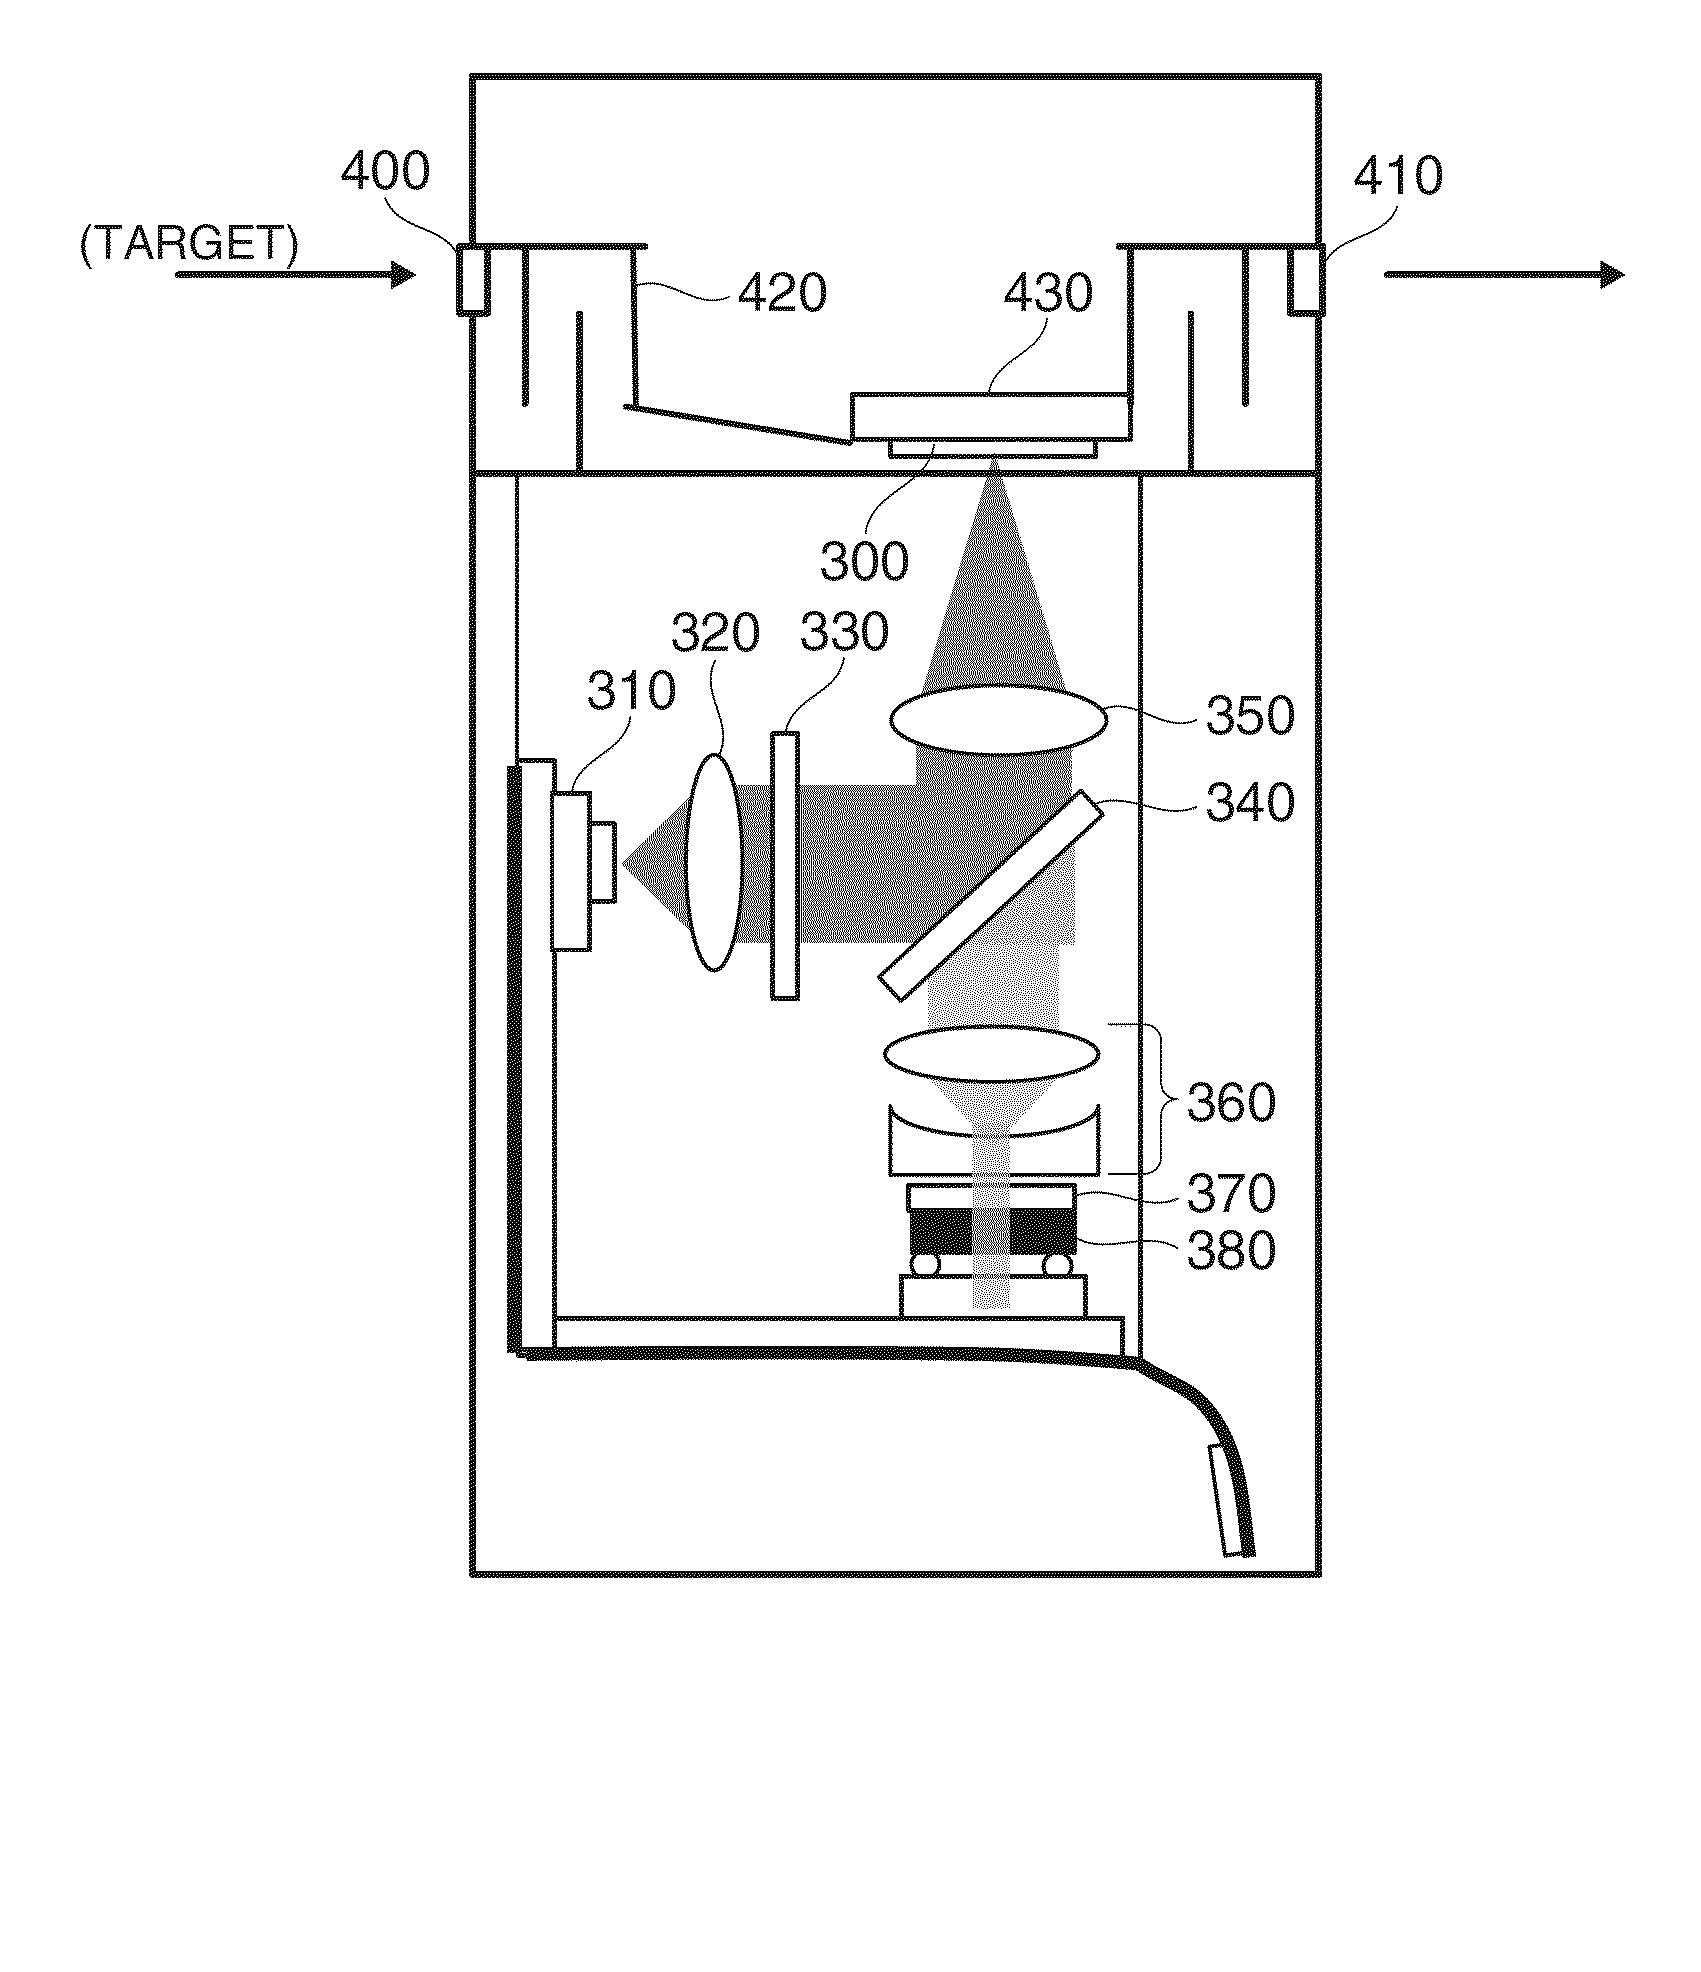 Optical device and analyzing apparatus